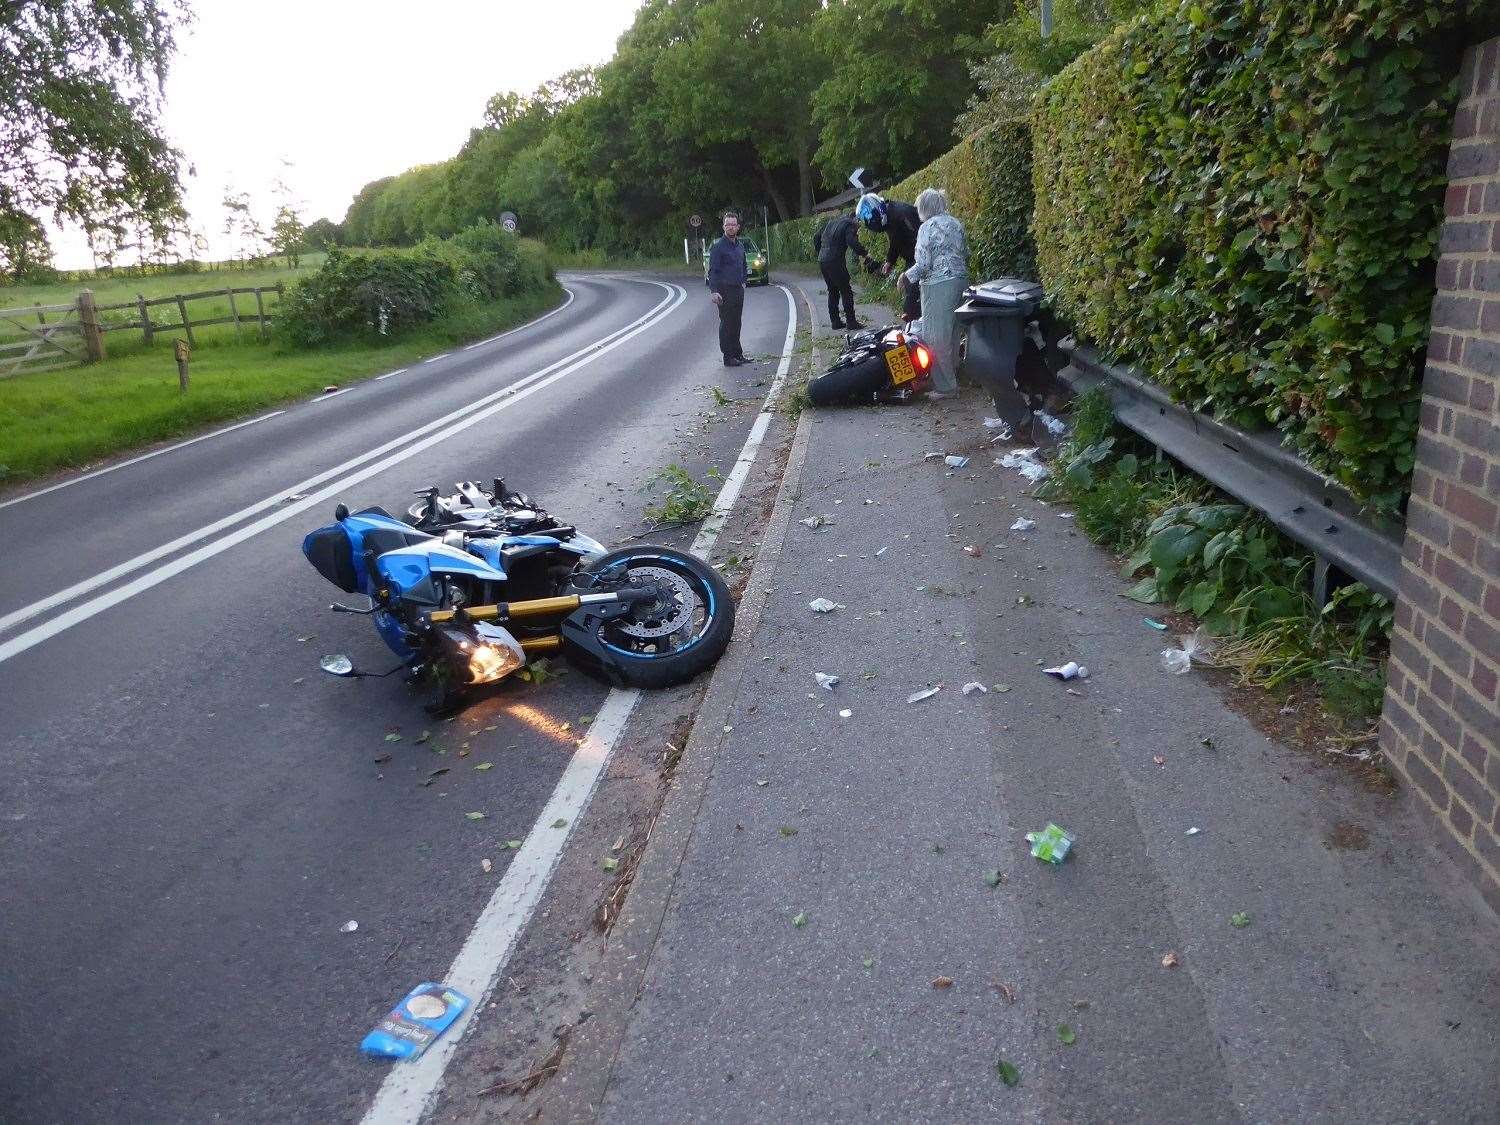 Two motorcycles crashed on the A257 in Littlebourne